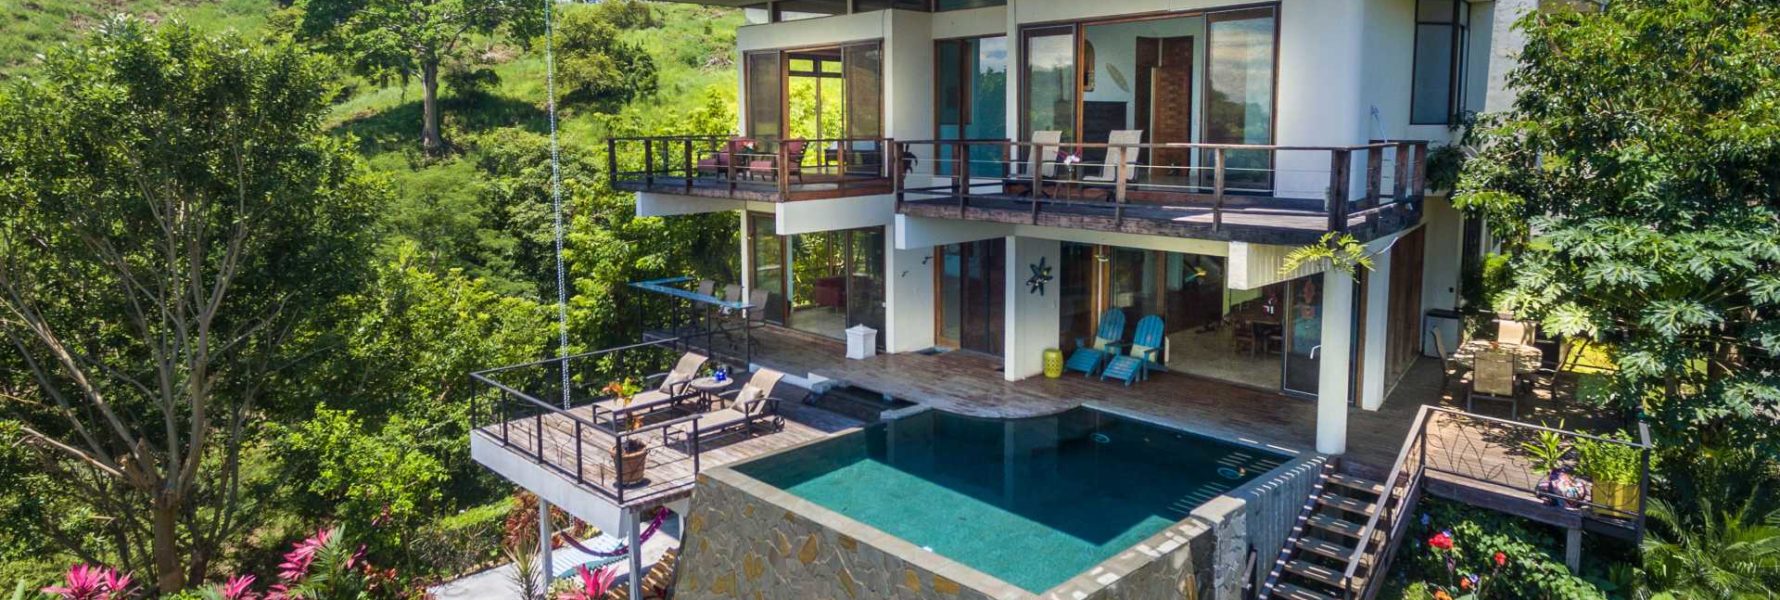 Enjoy secluded privacy and majestic ocean views. This luxury Manuel Antonio rental has it all. 